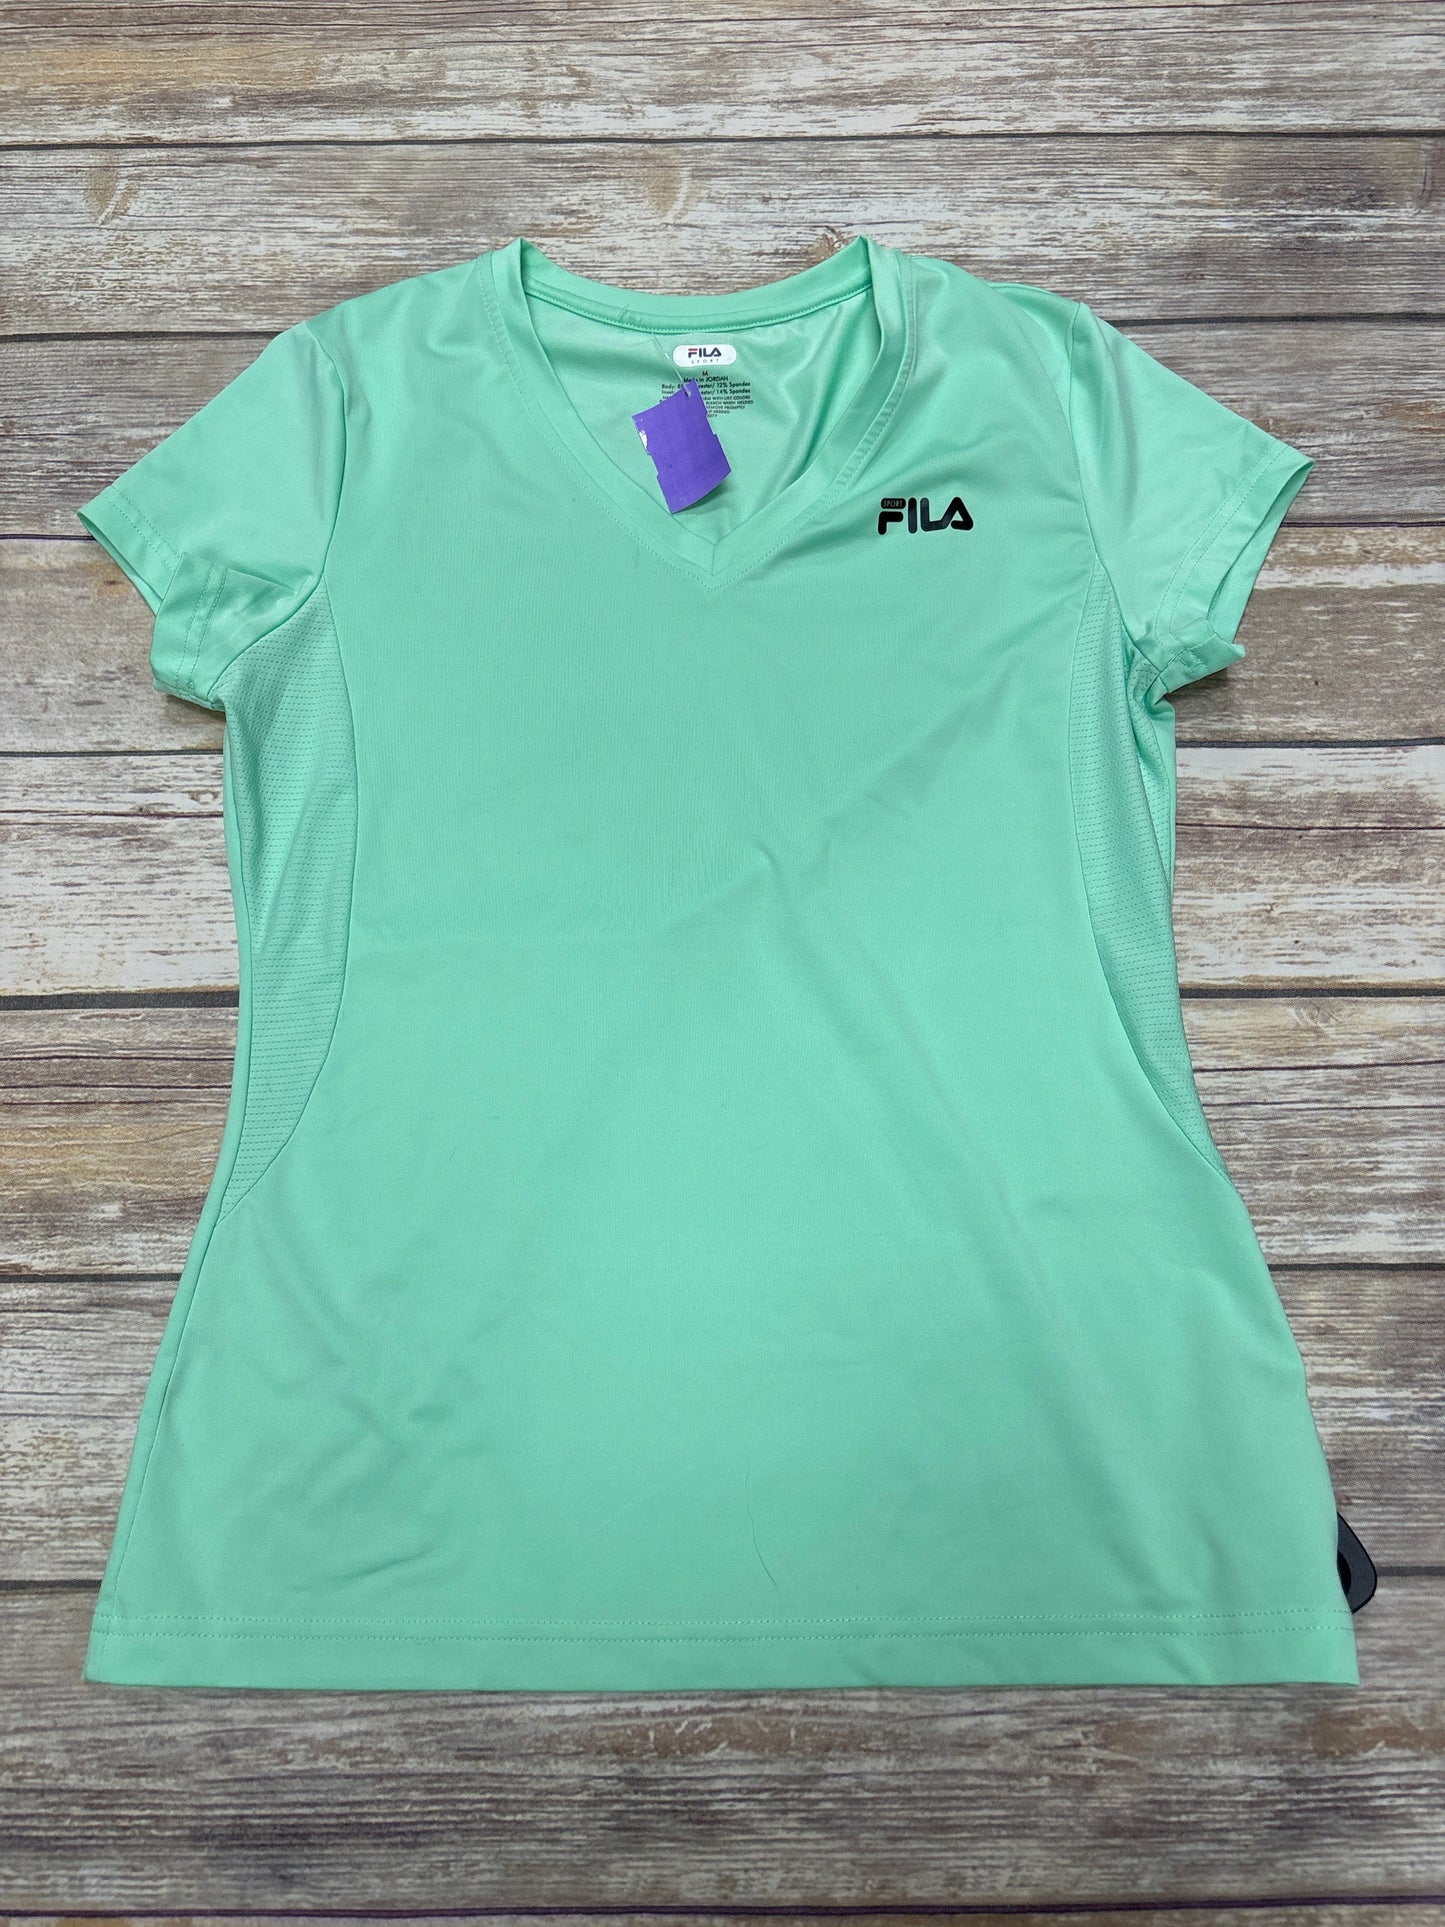 Green Athletic Top Short Sleeve Fila, Size M